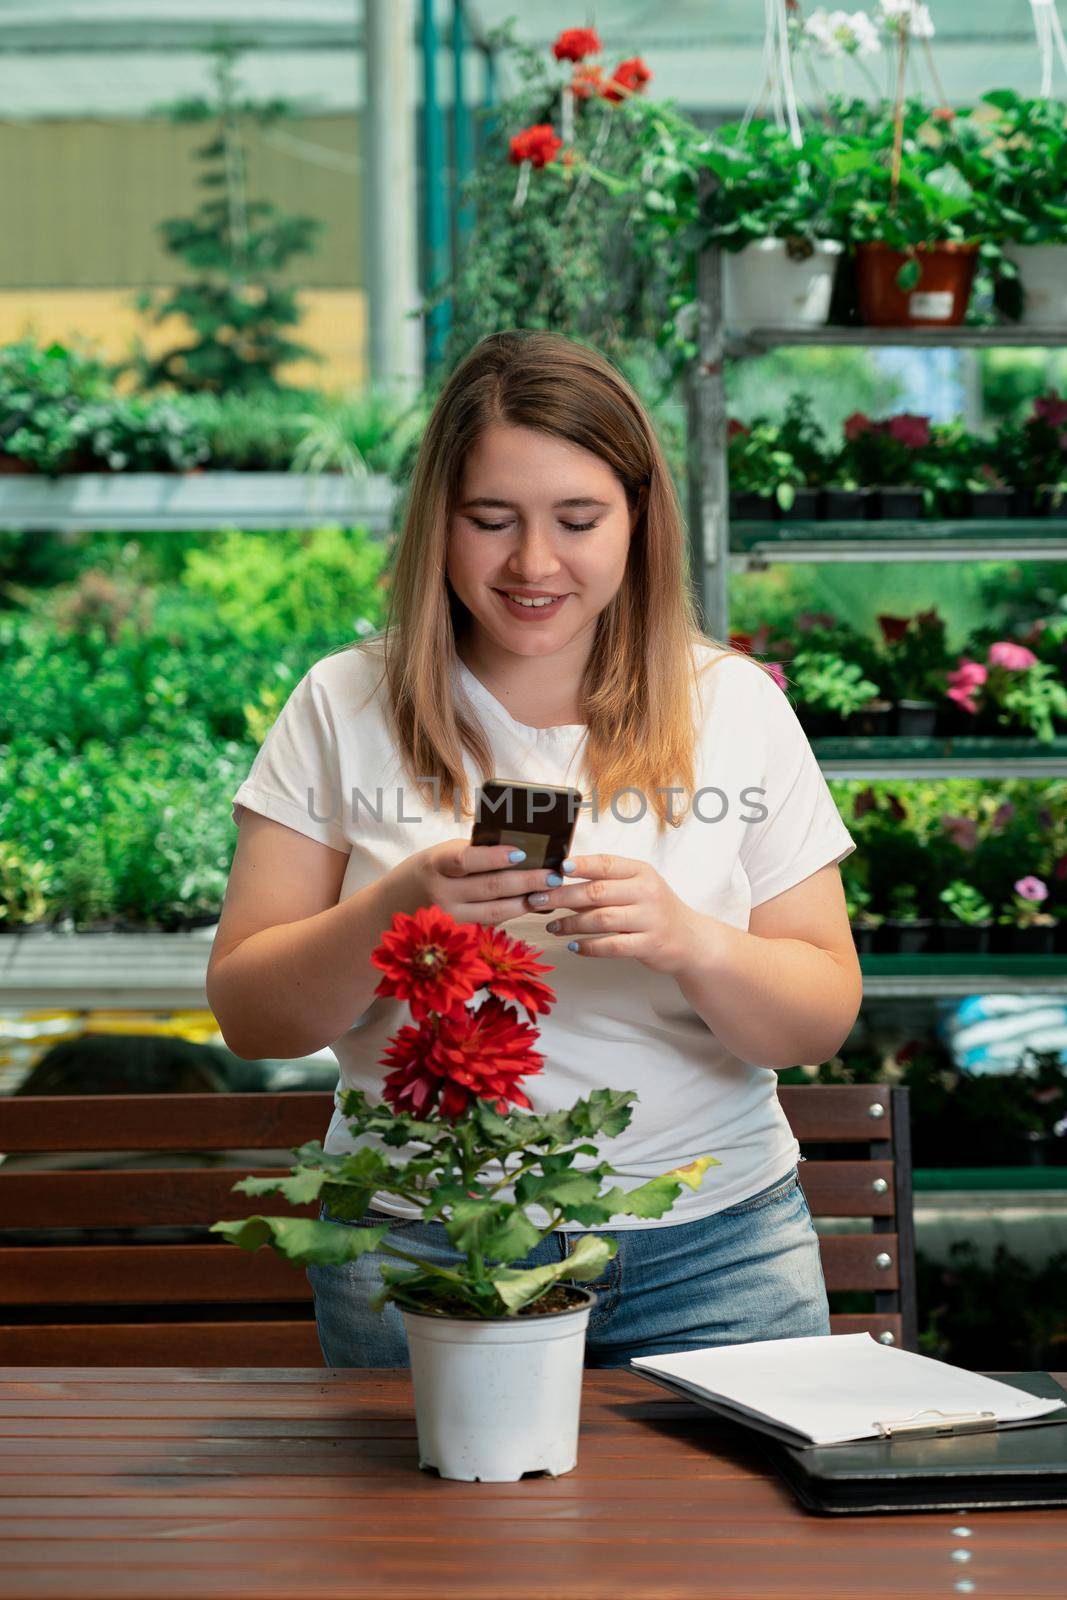 Garden center worker takes a picture of a display case with potted plants on her phone